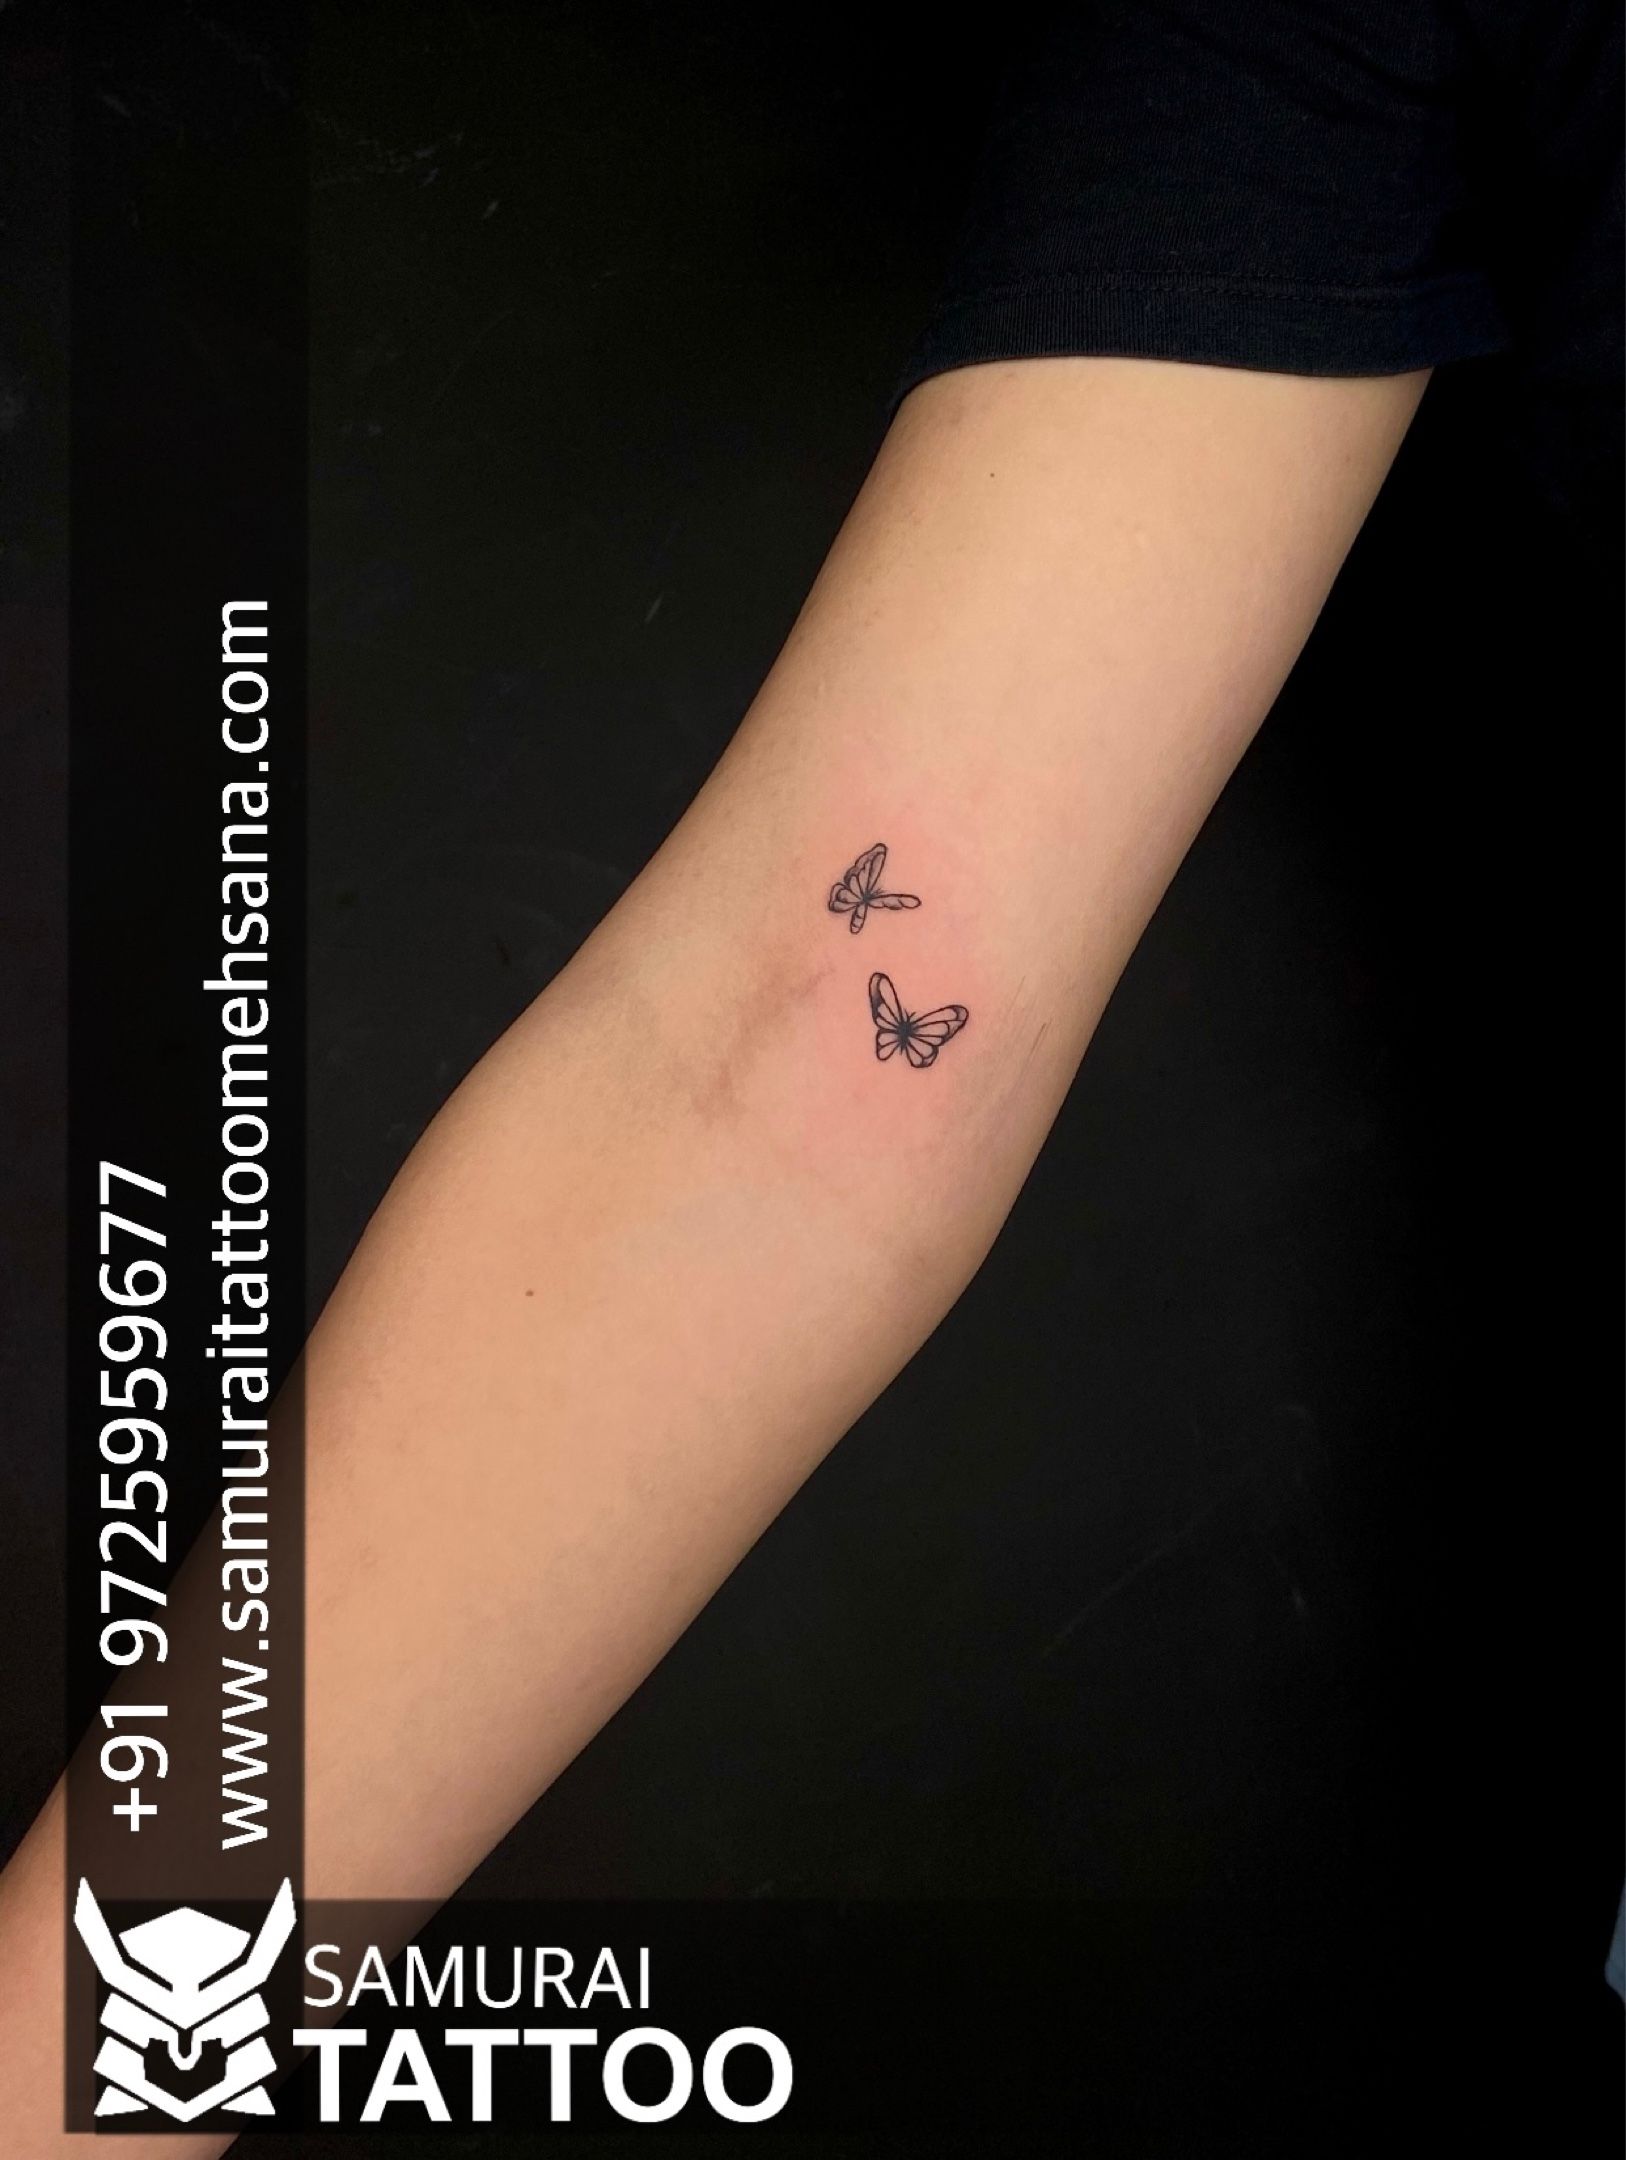 Small Tattoo - A Great Service for PMU Artists to Get More $$$